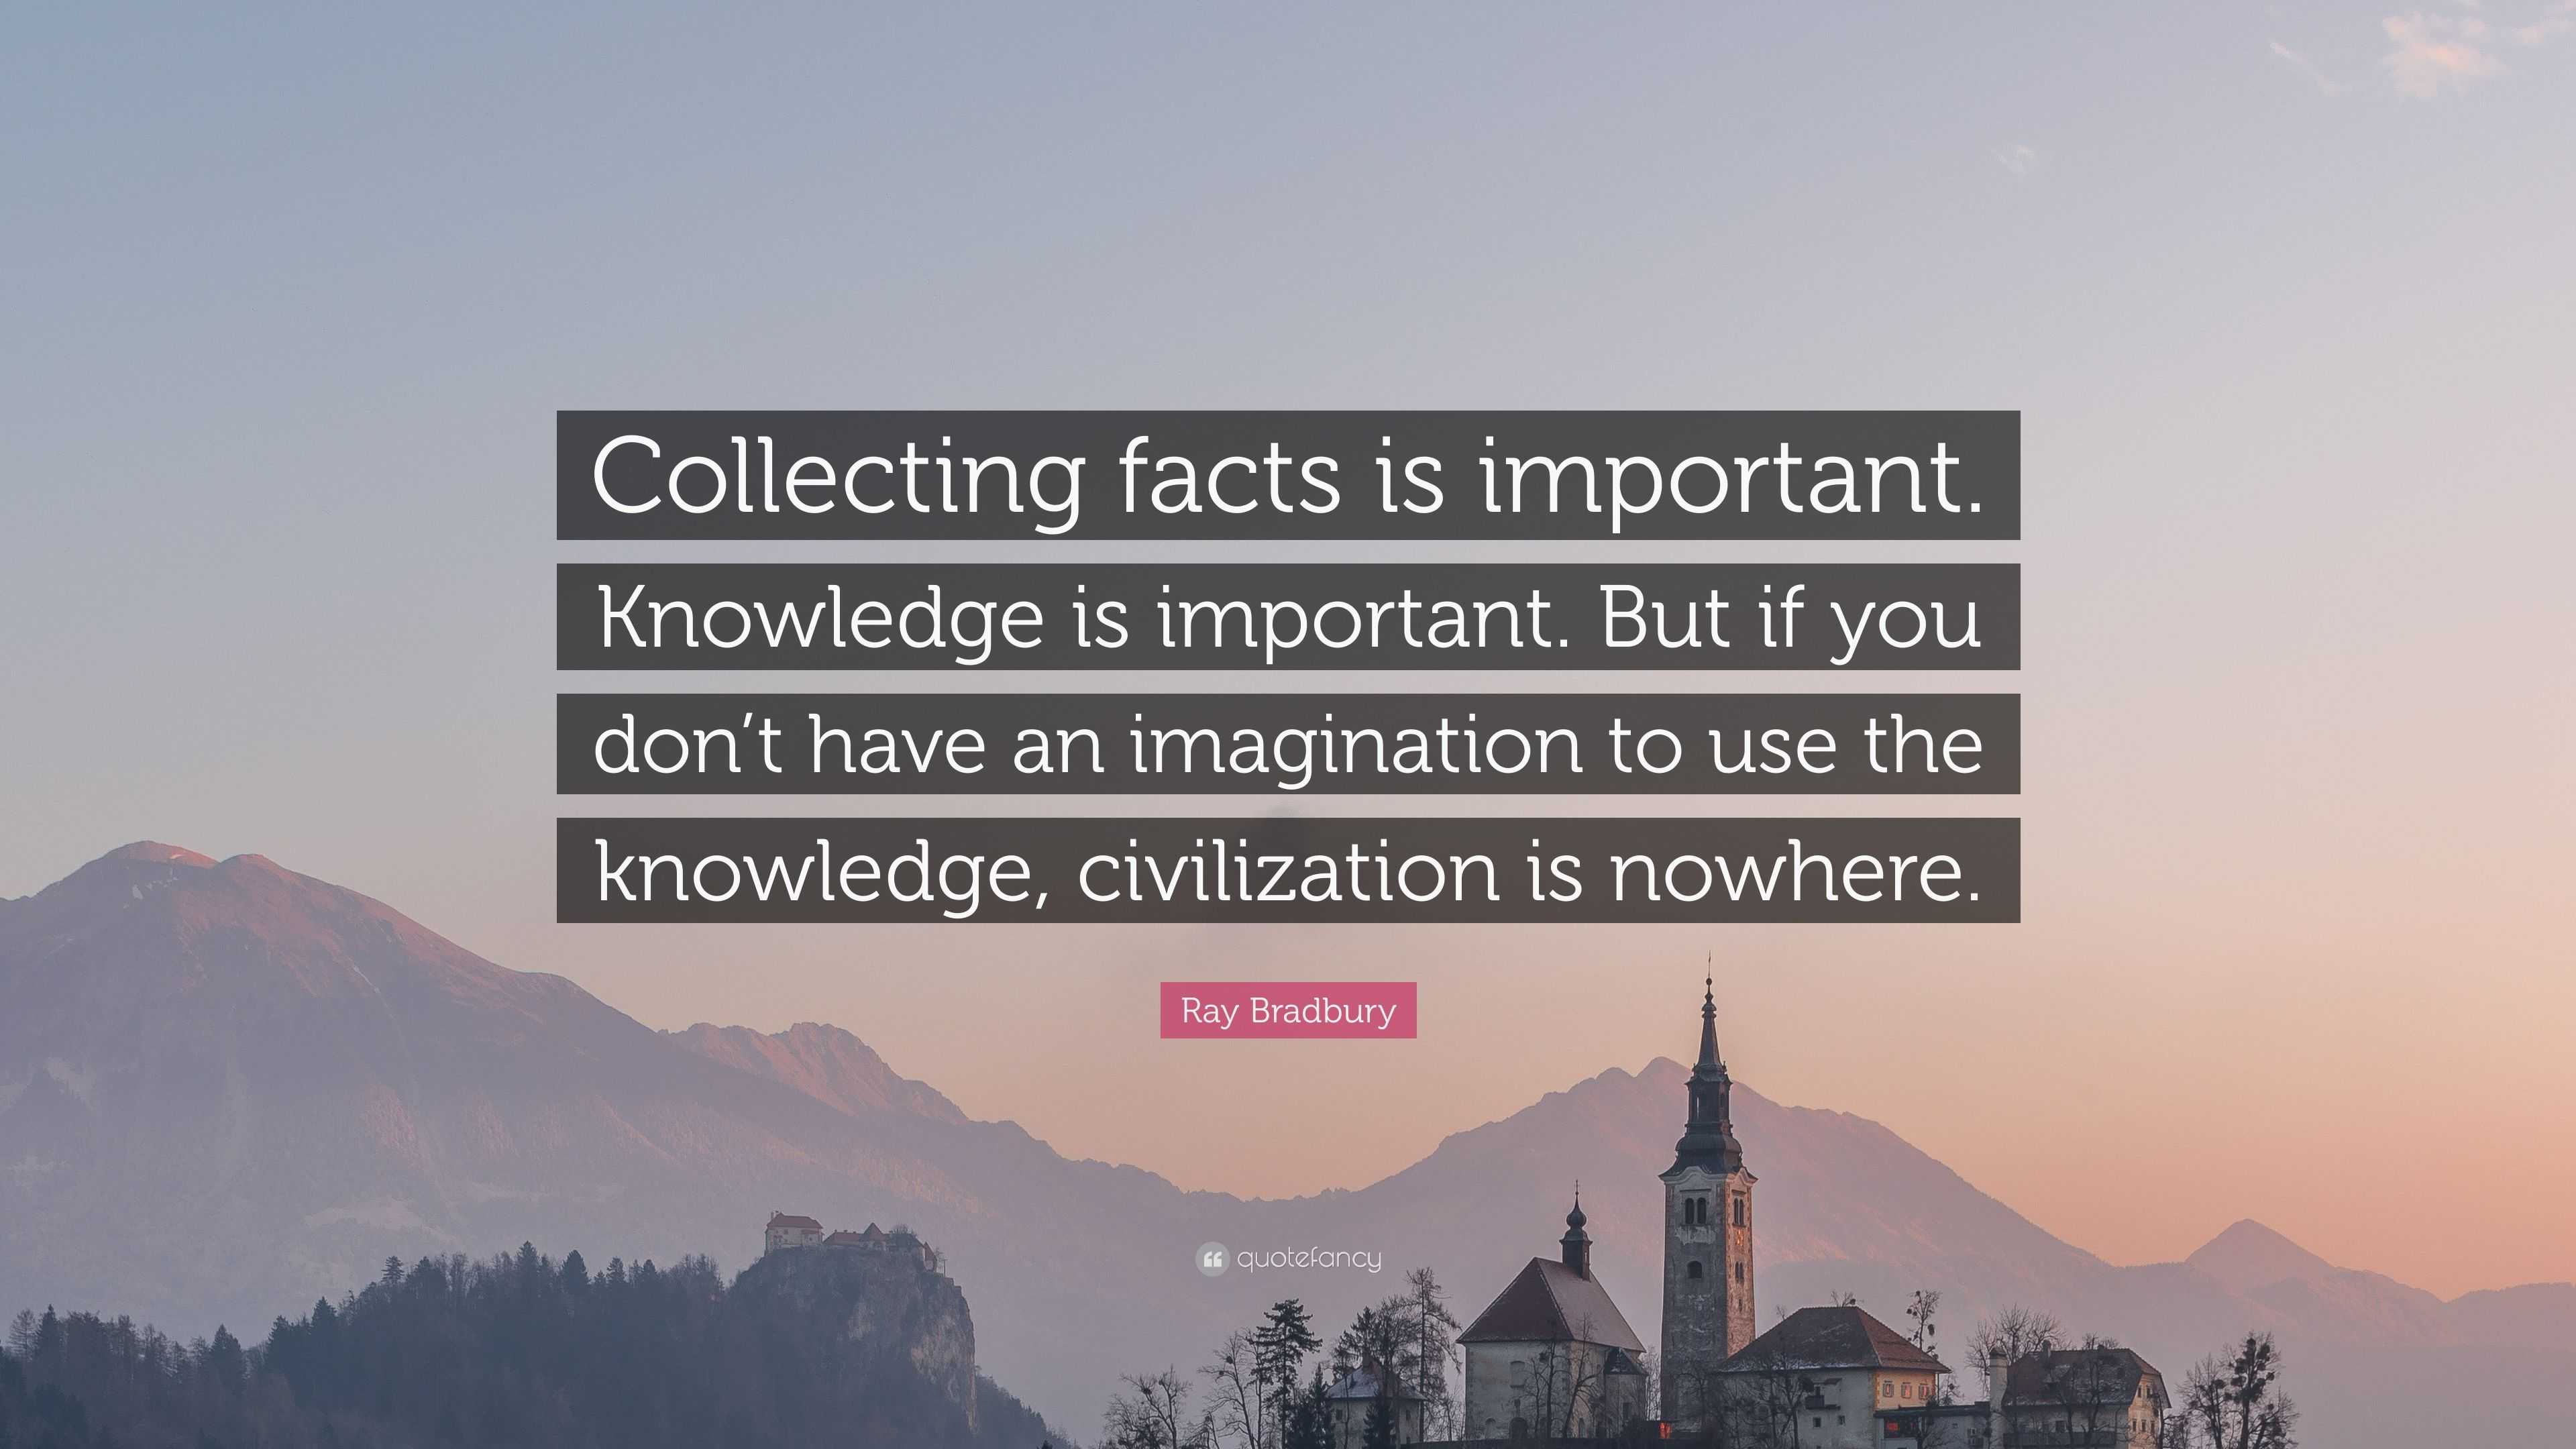 Ray Bradbury Quote: “Collecting facts is important. Knowledge is